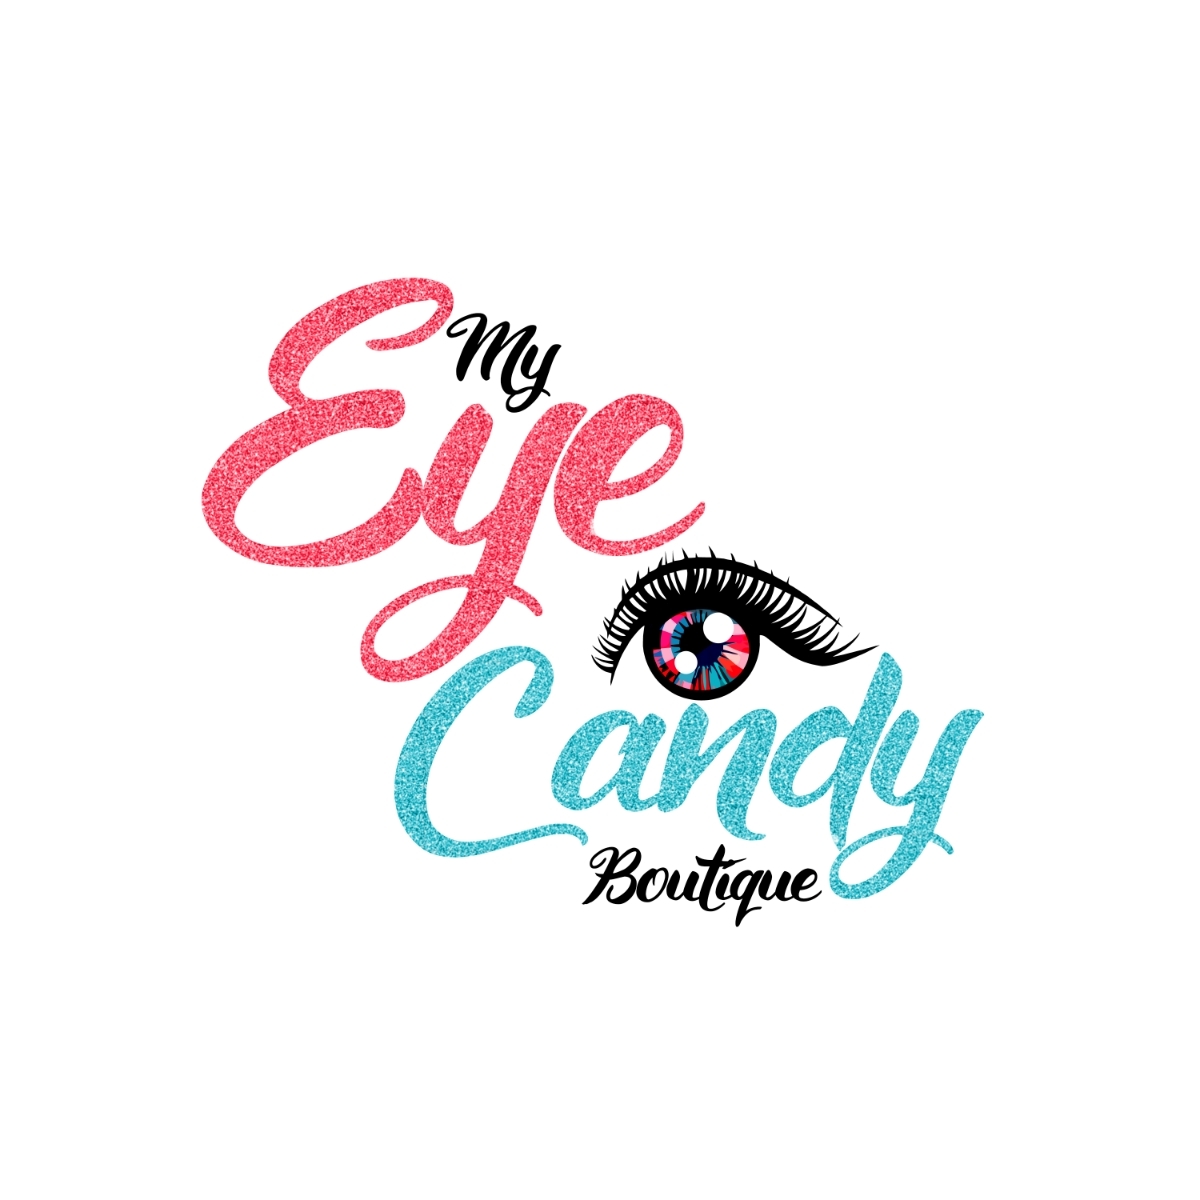 My Eye Candy Boutique